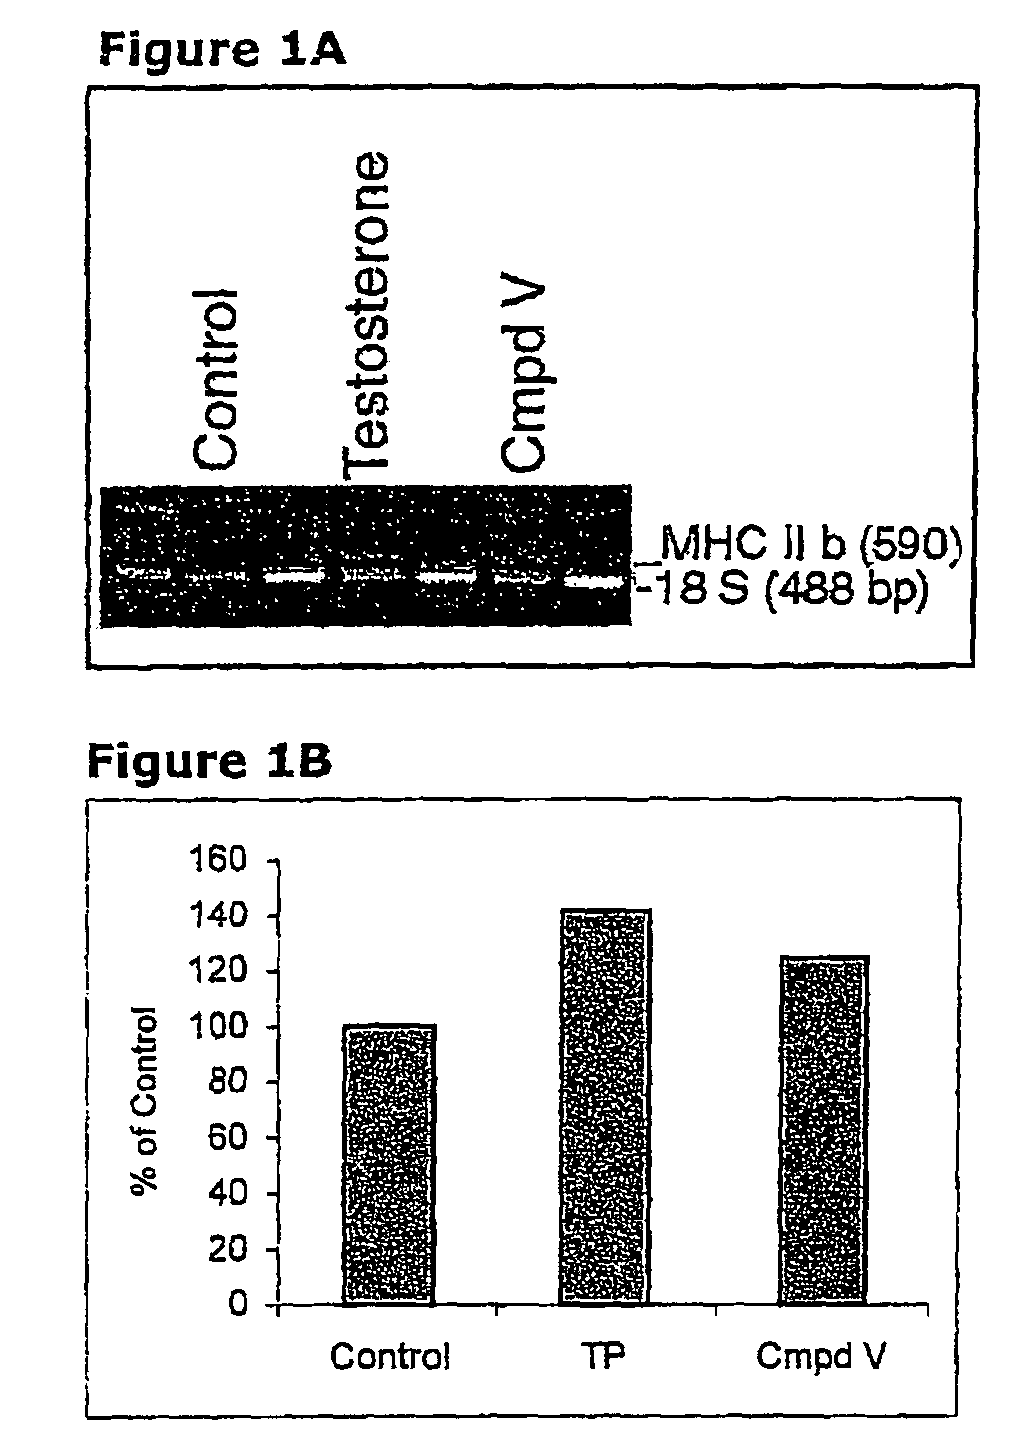 Treating muscle wasting with selective androgen receptor modulators